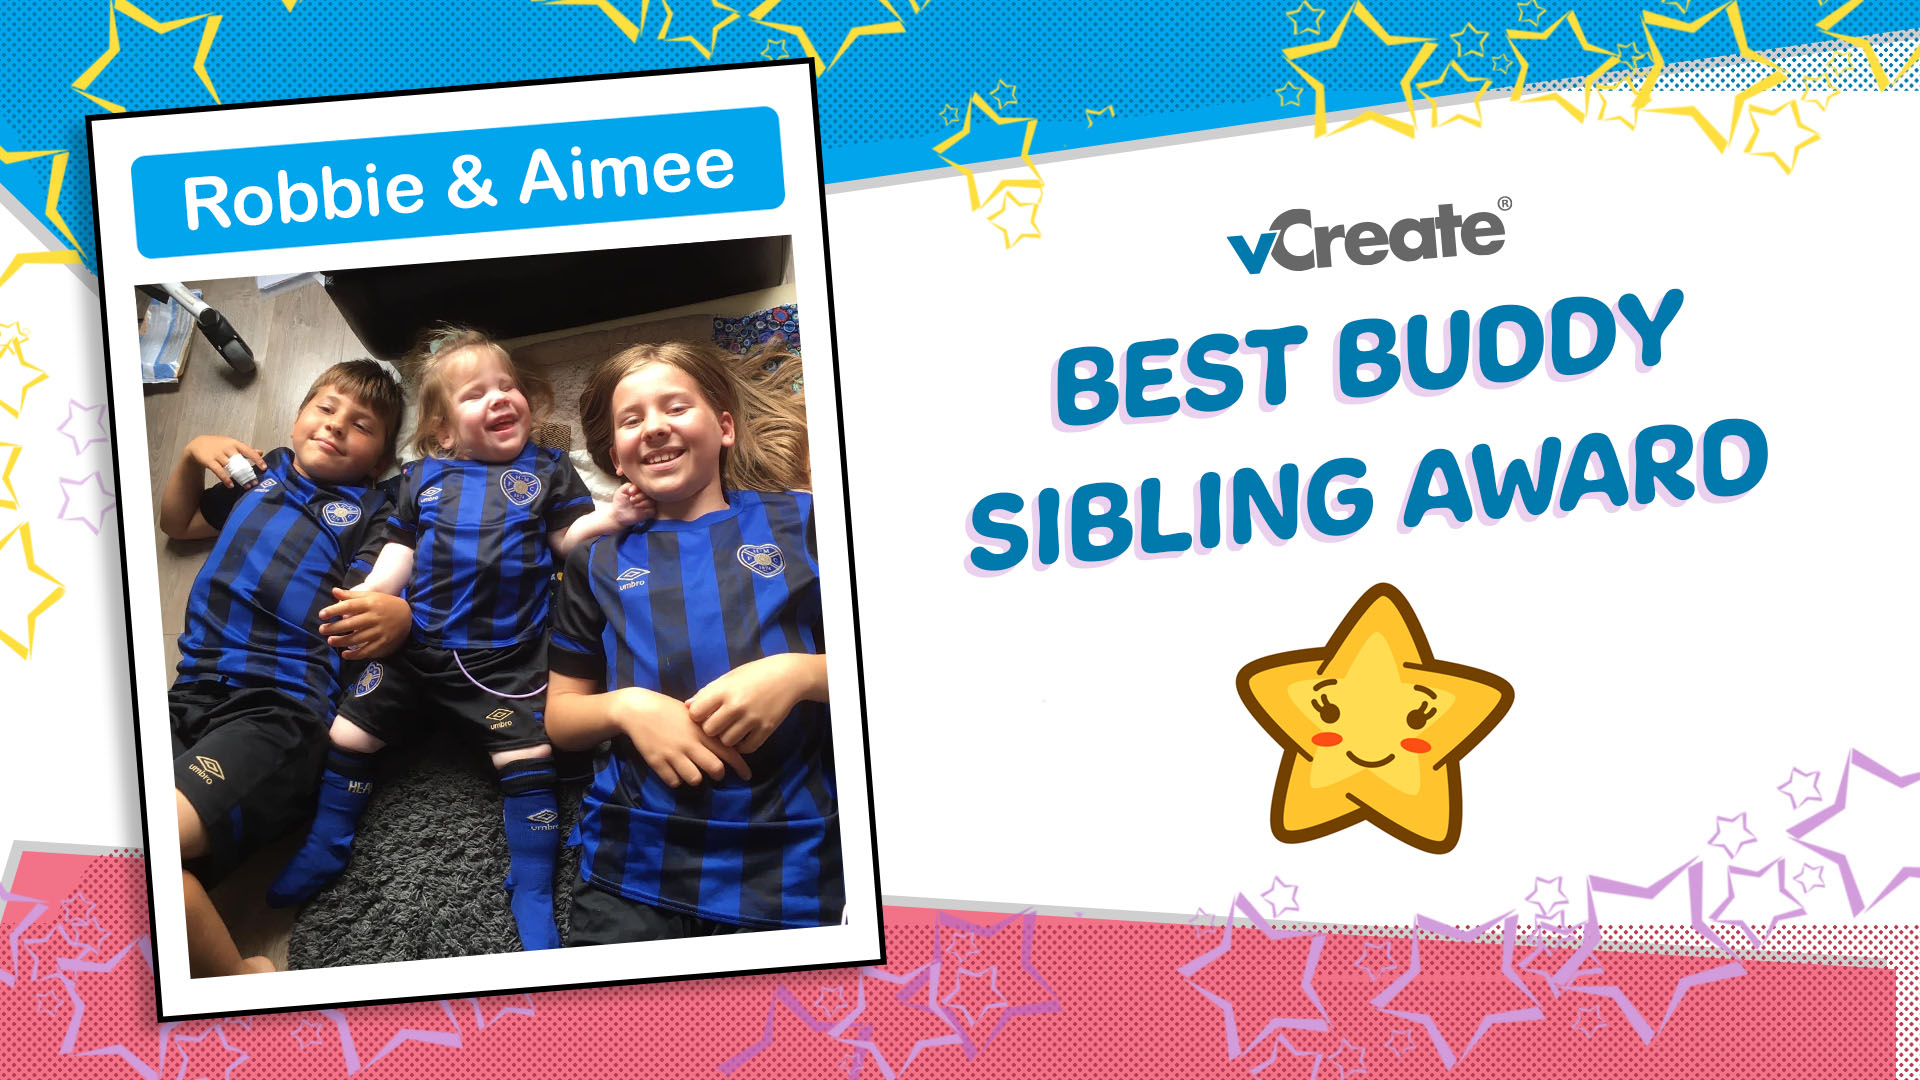 Aimee and Robbie are receiving our Best Buddy Sibling Award!